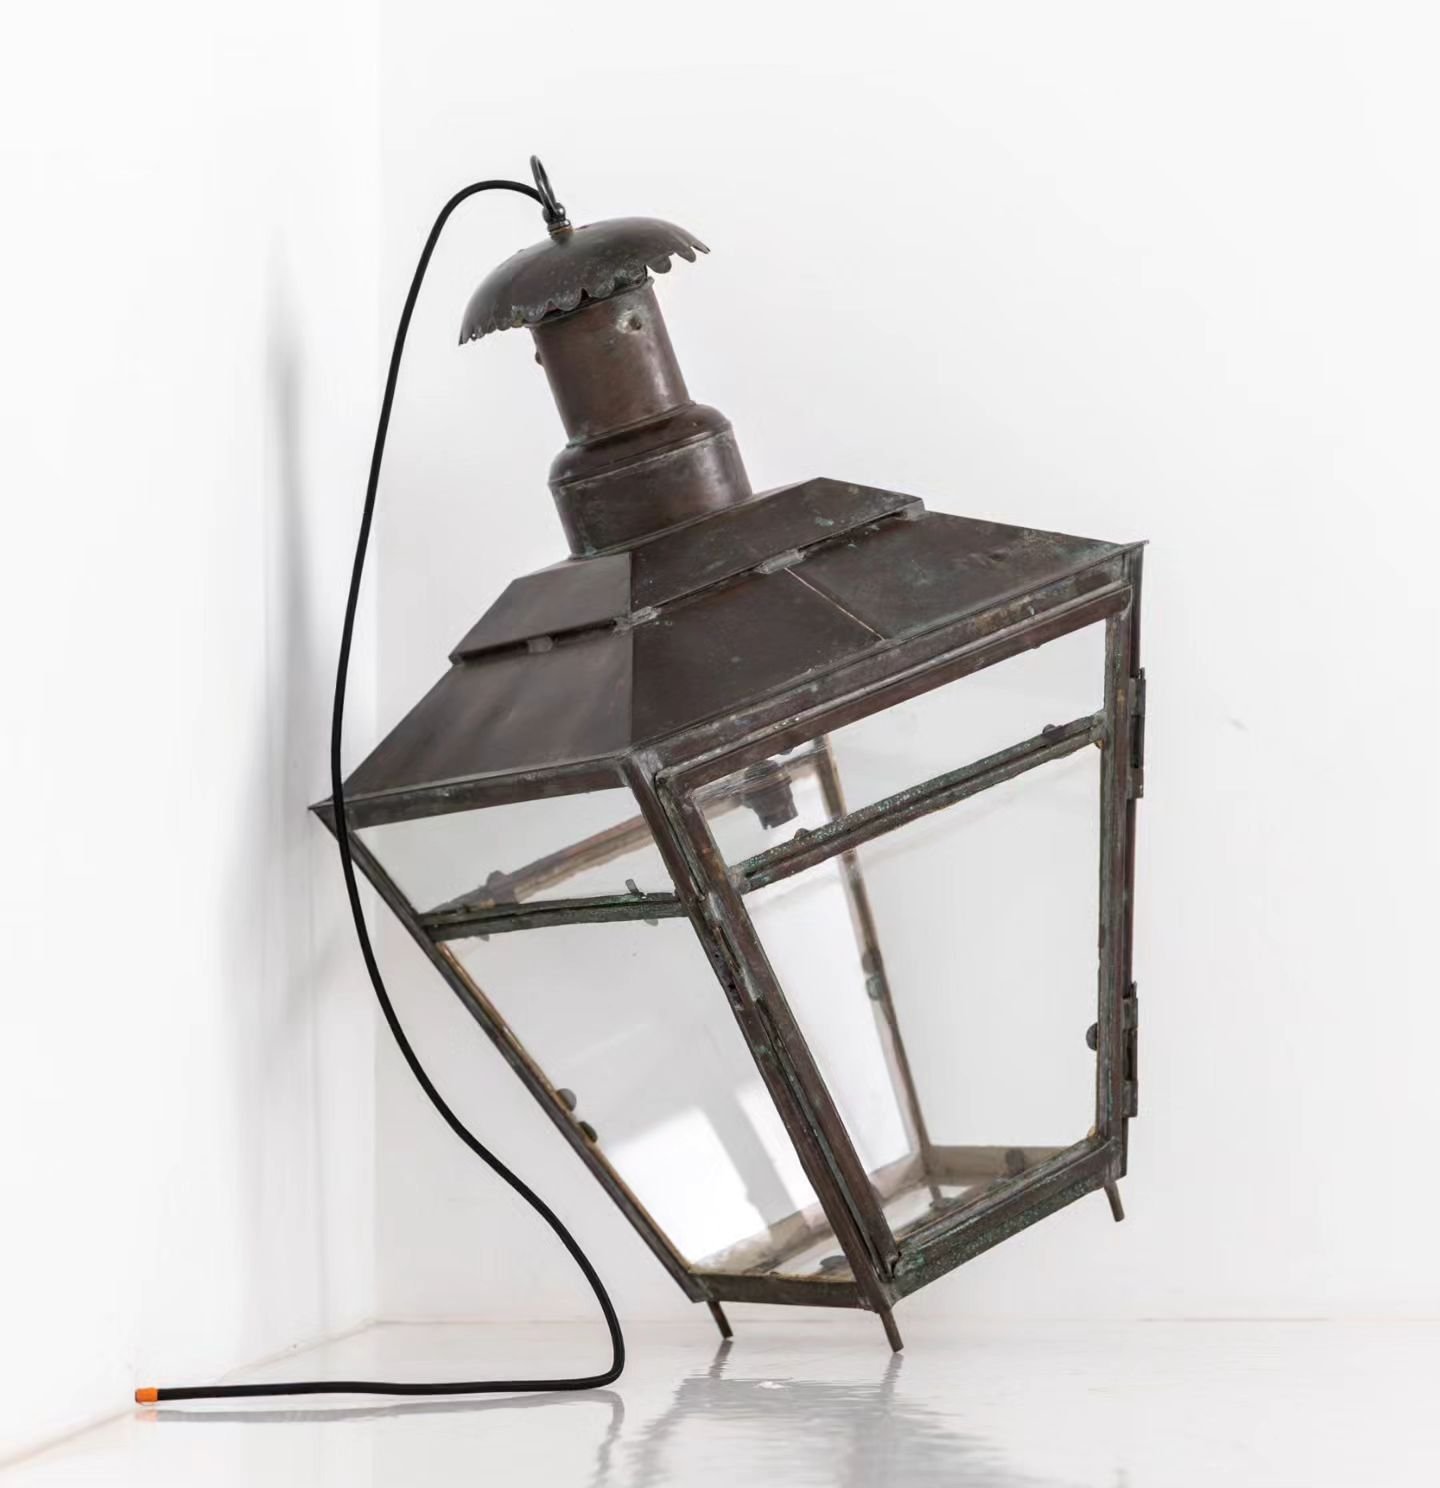 An simply formed copper street lantern with natural patina. English, c.1900.

Formerly a gas lantern, now discreetly adapted for use an electric pendant. Dating to the late 19th/early 20th century with a beautiful deep patina, with single opening doo